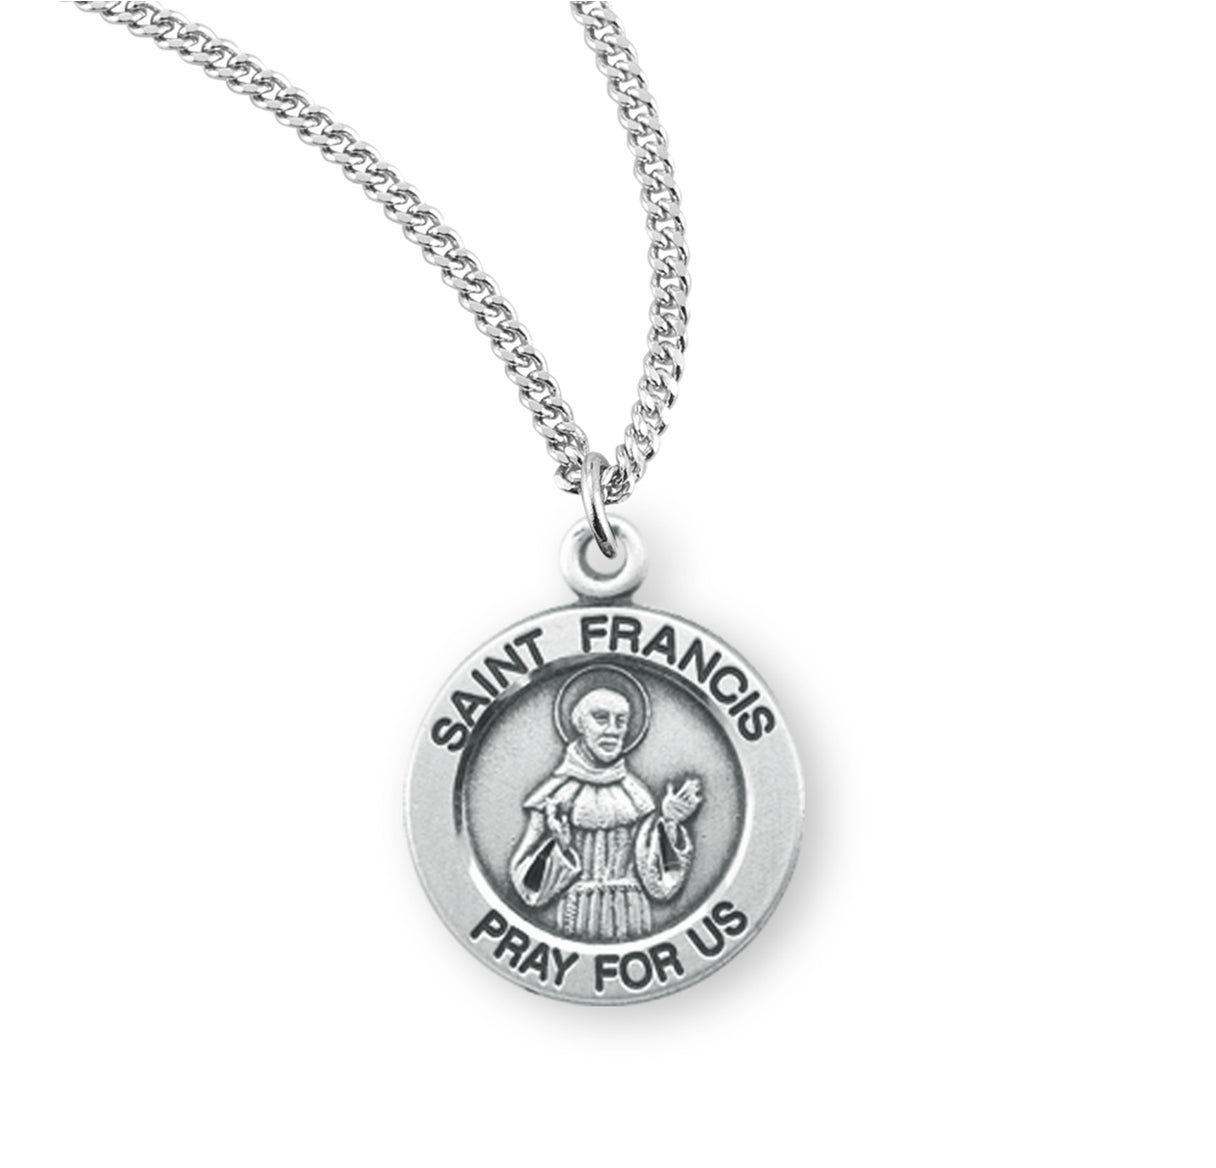 Patron Saint Francis of Assisi Round Sterling Silver Medal